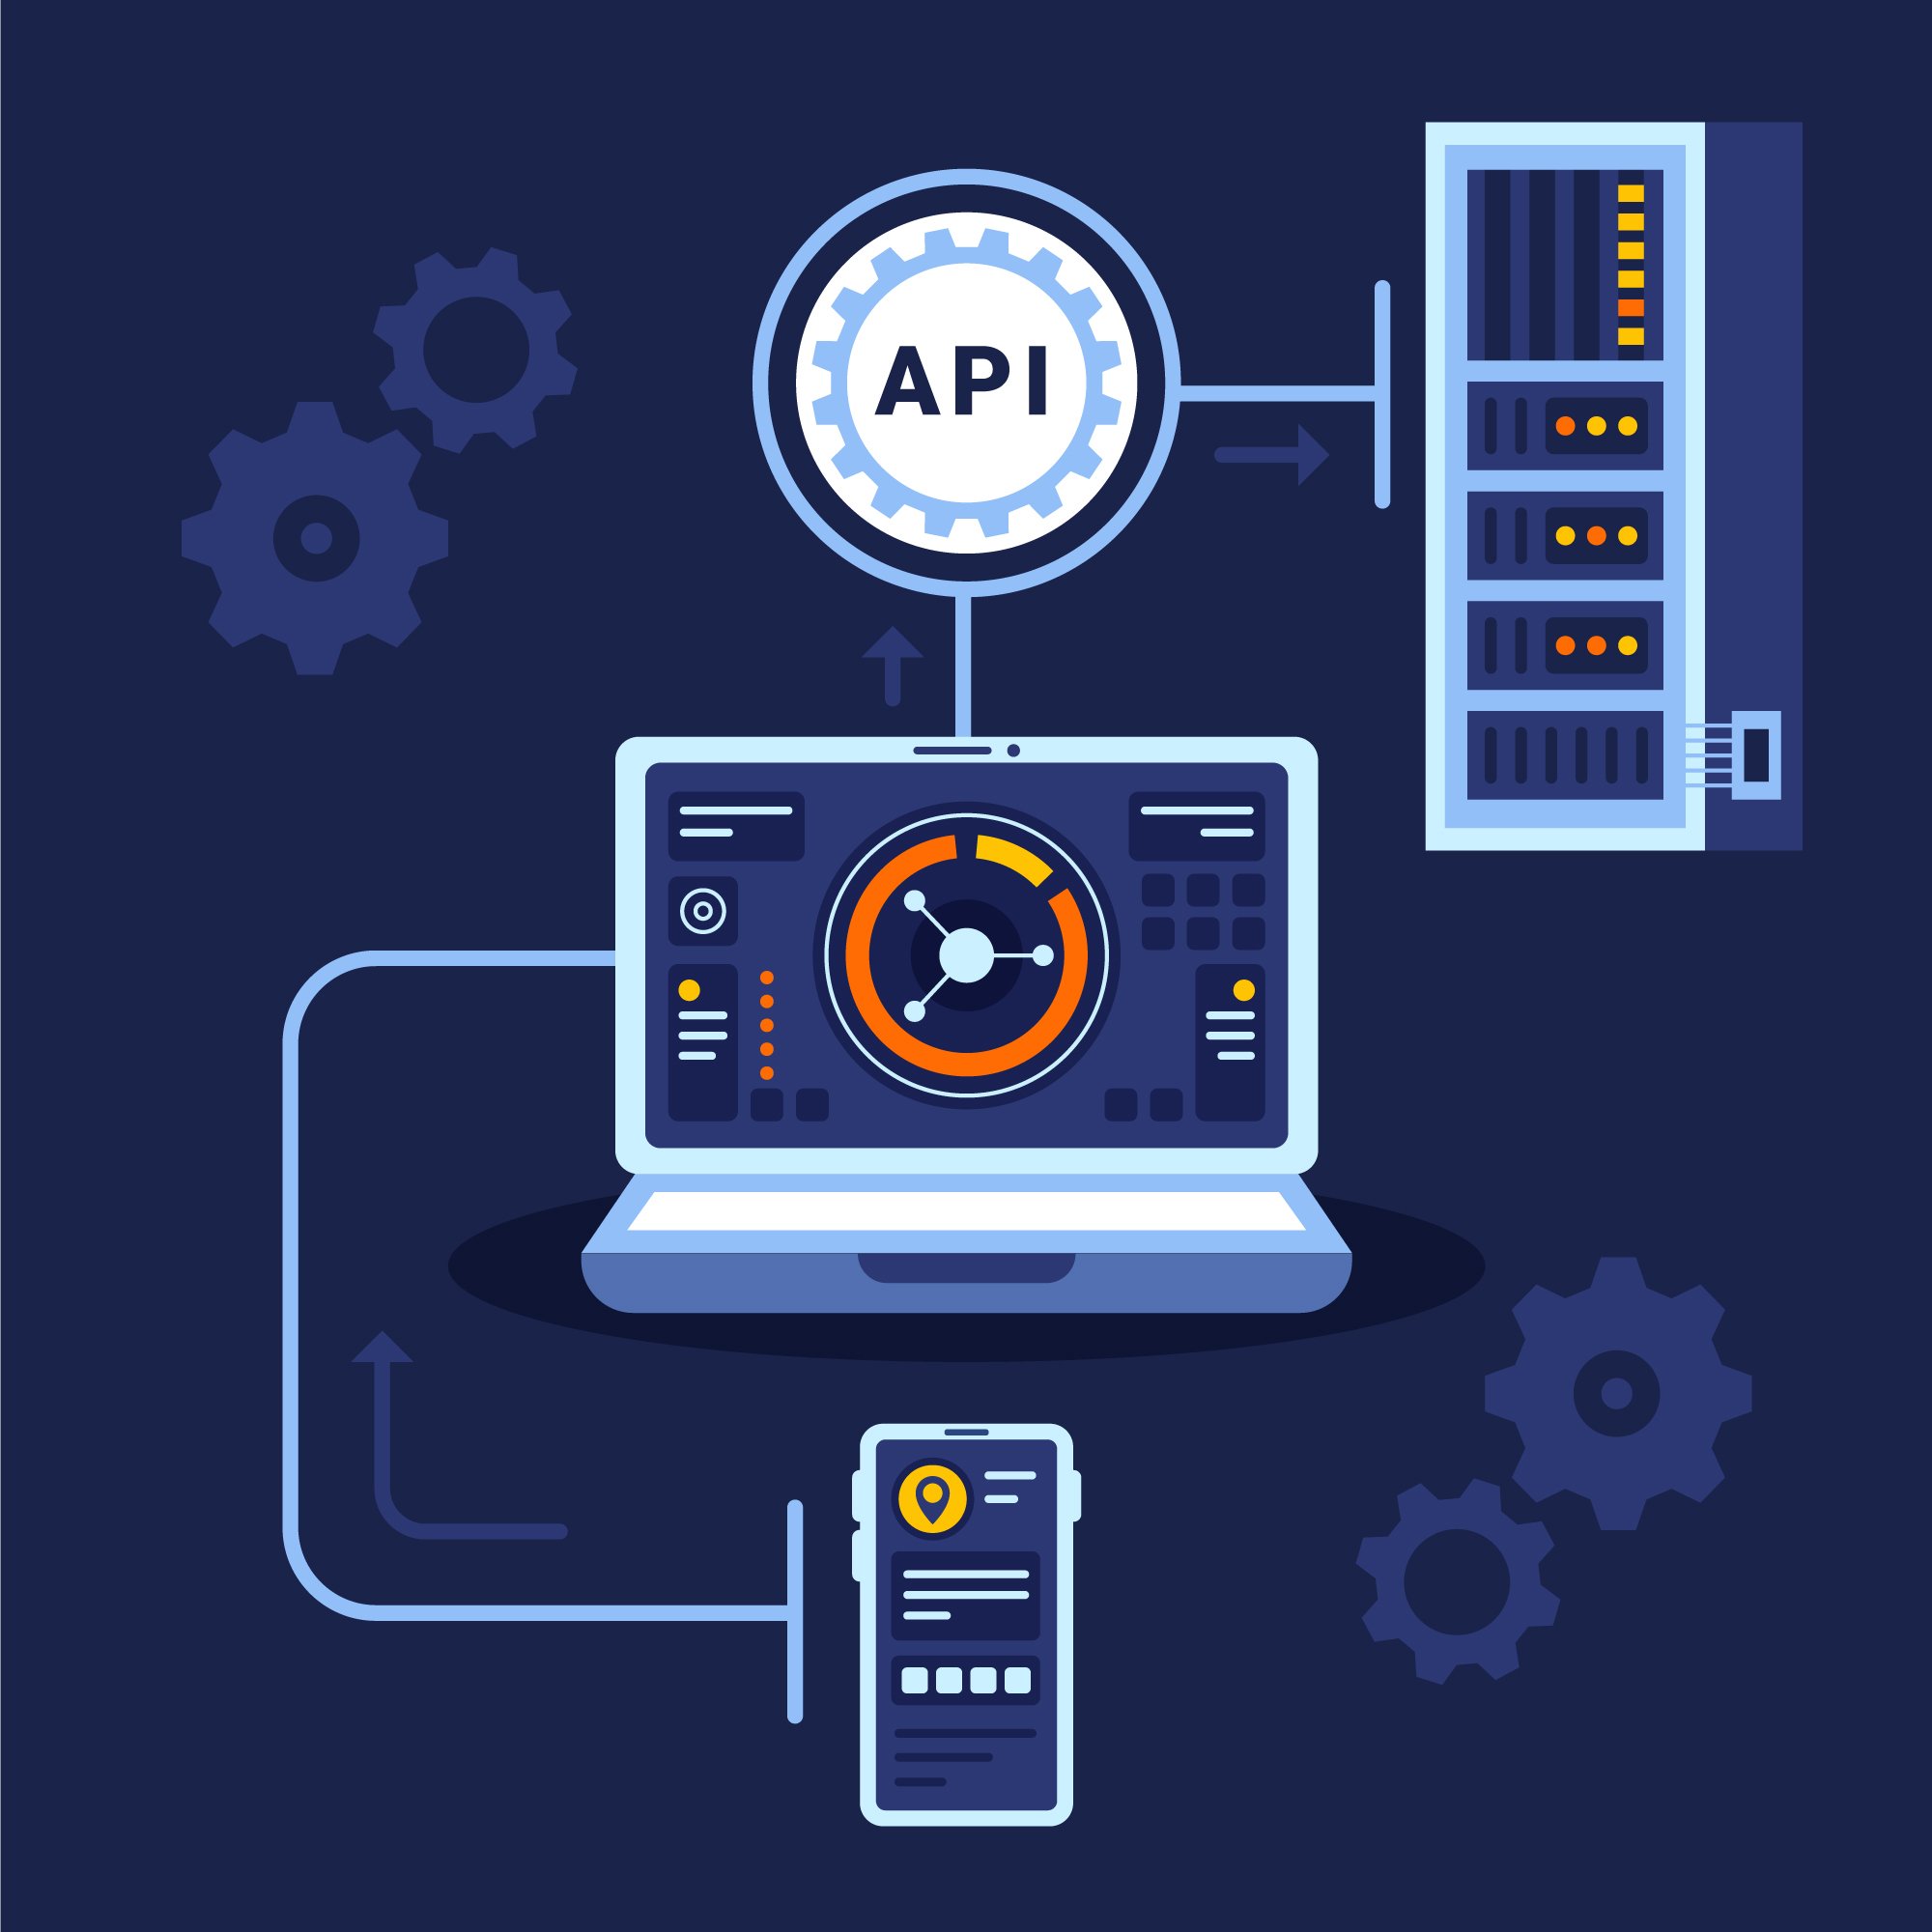 Ensure That The APIs Perform The Intended Functions Accurately